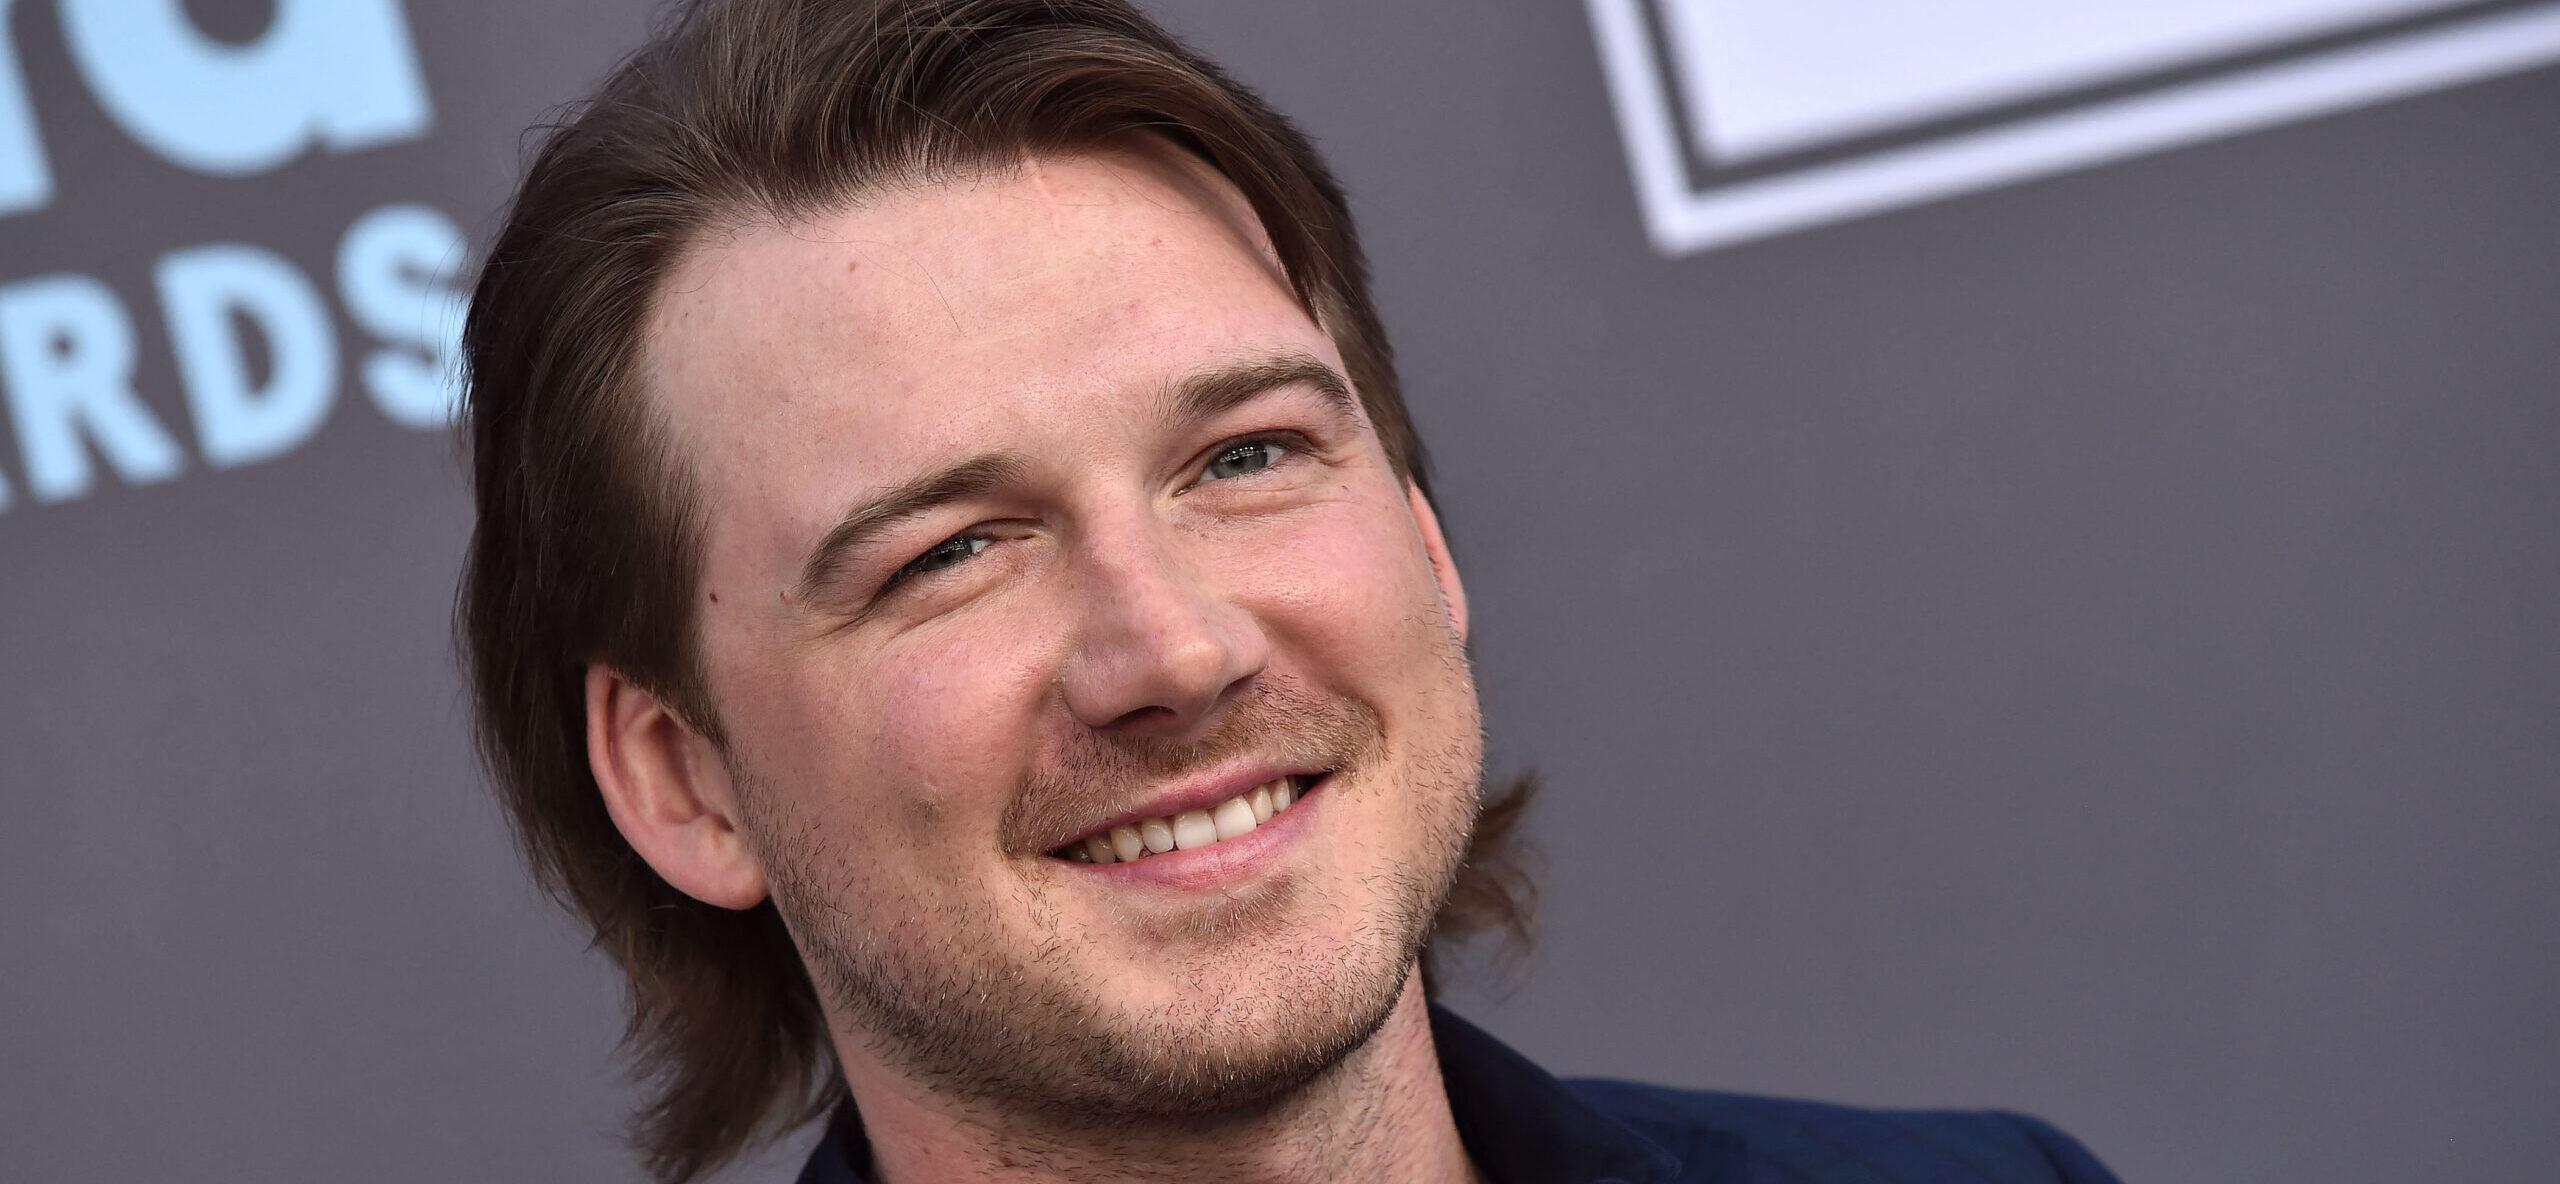 Morgan Wallen Performs At The Stagecoach Festival Weeks After His Arrest